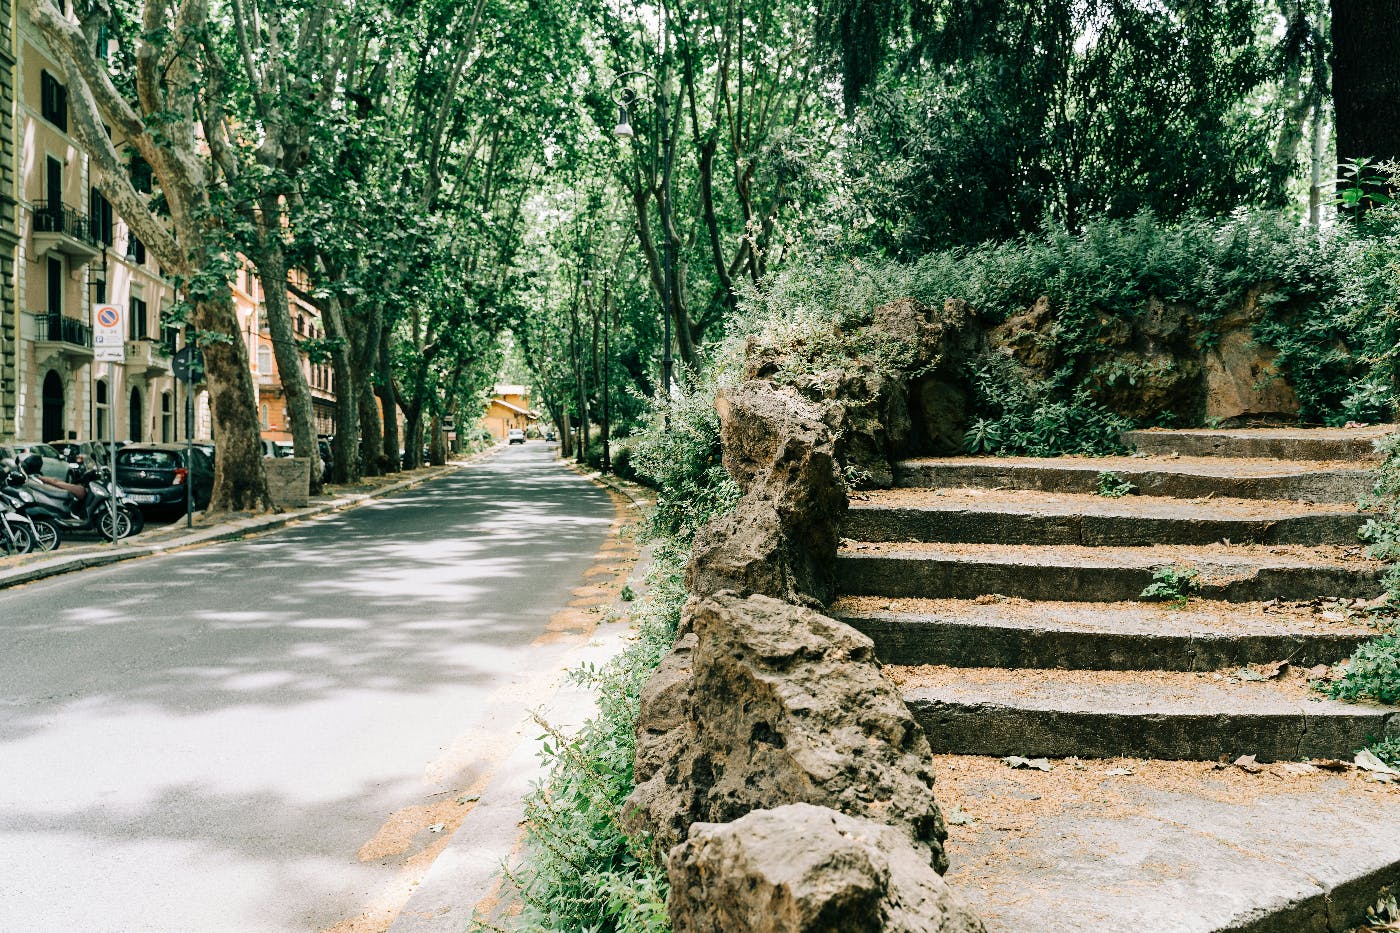 A stone staircase beside a tree lined road